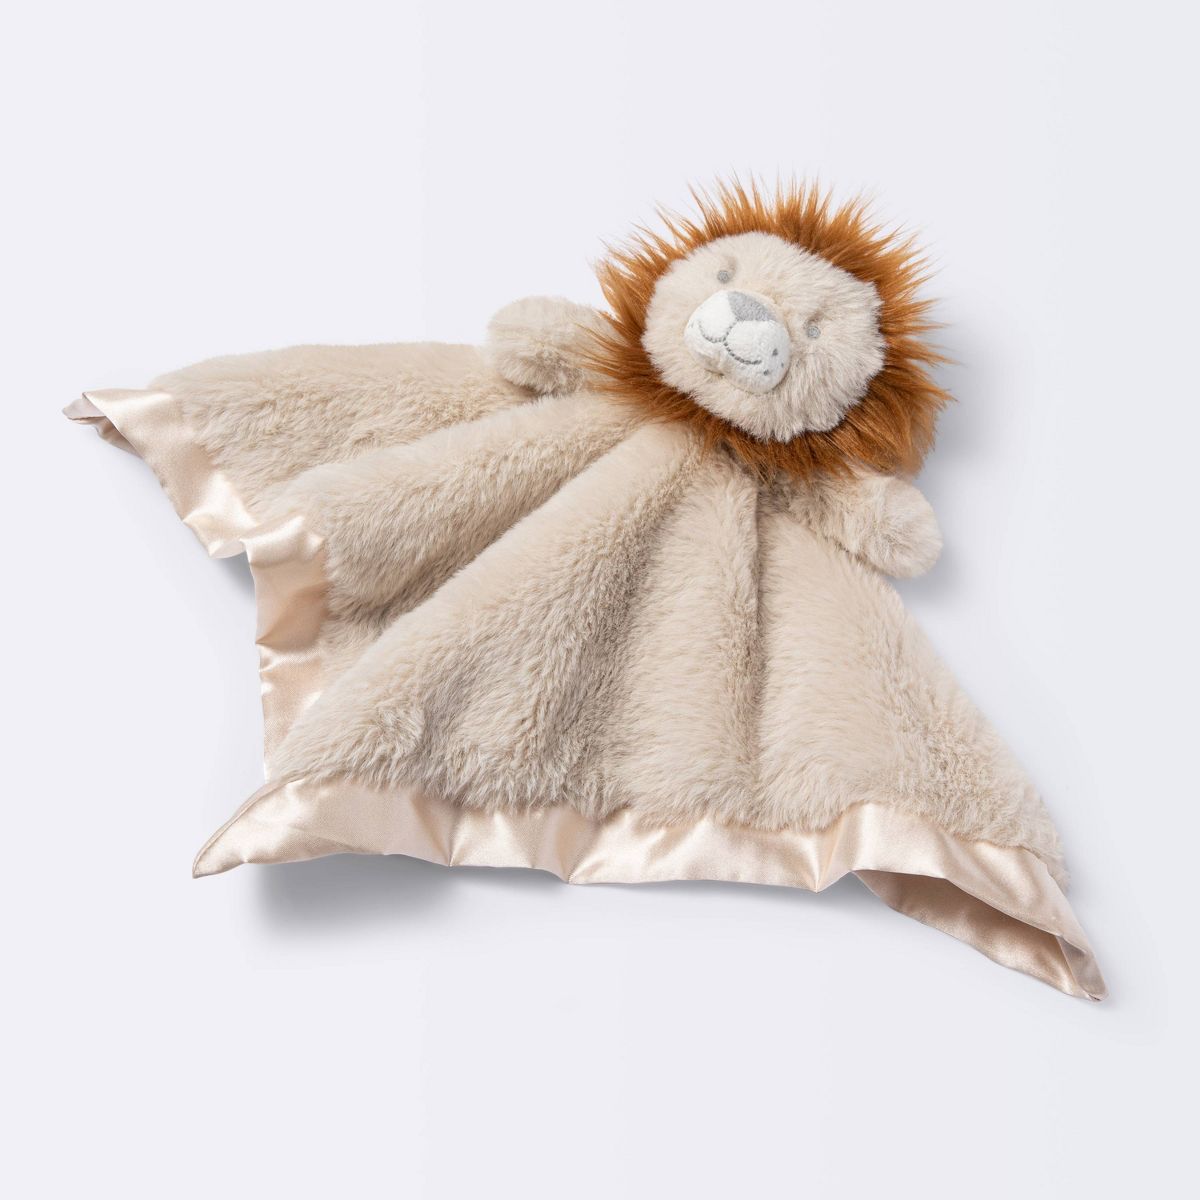 Small Security Blanket - Cloud Island™ Lion | Target